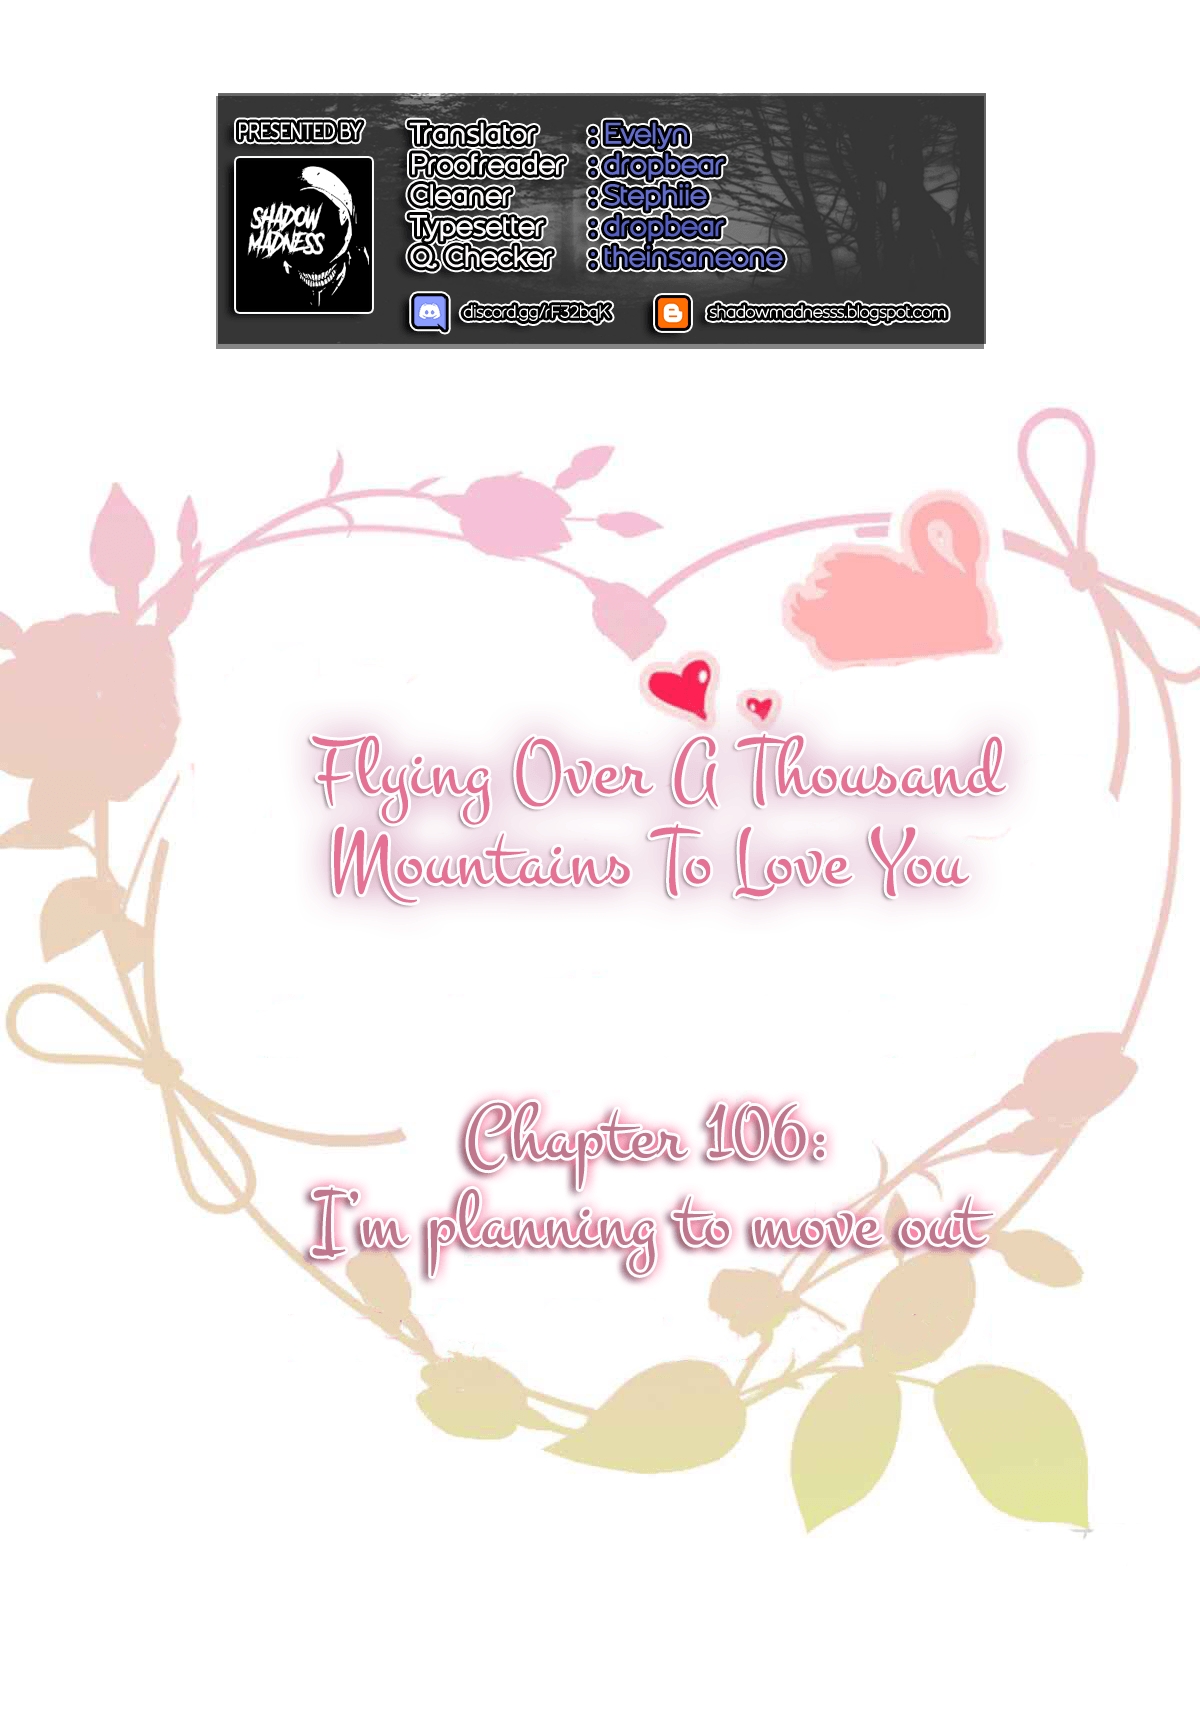 Flying Over a Thousand Mountains to Love You Ch. 106 I’m planning to move out